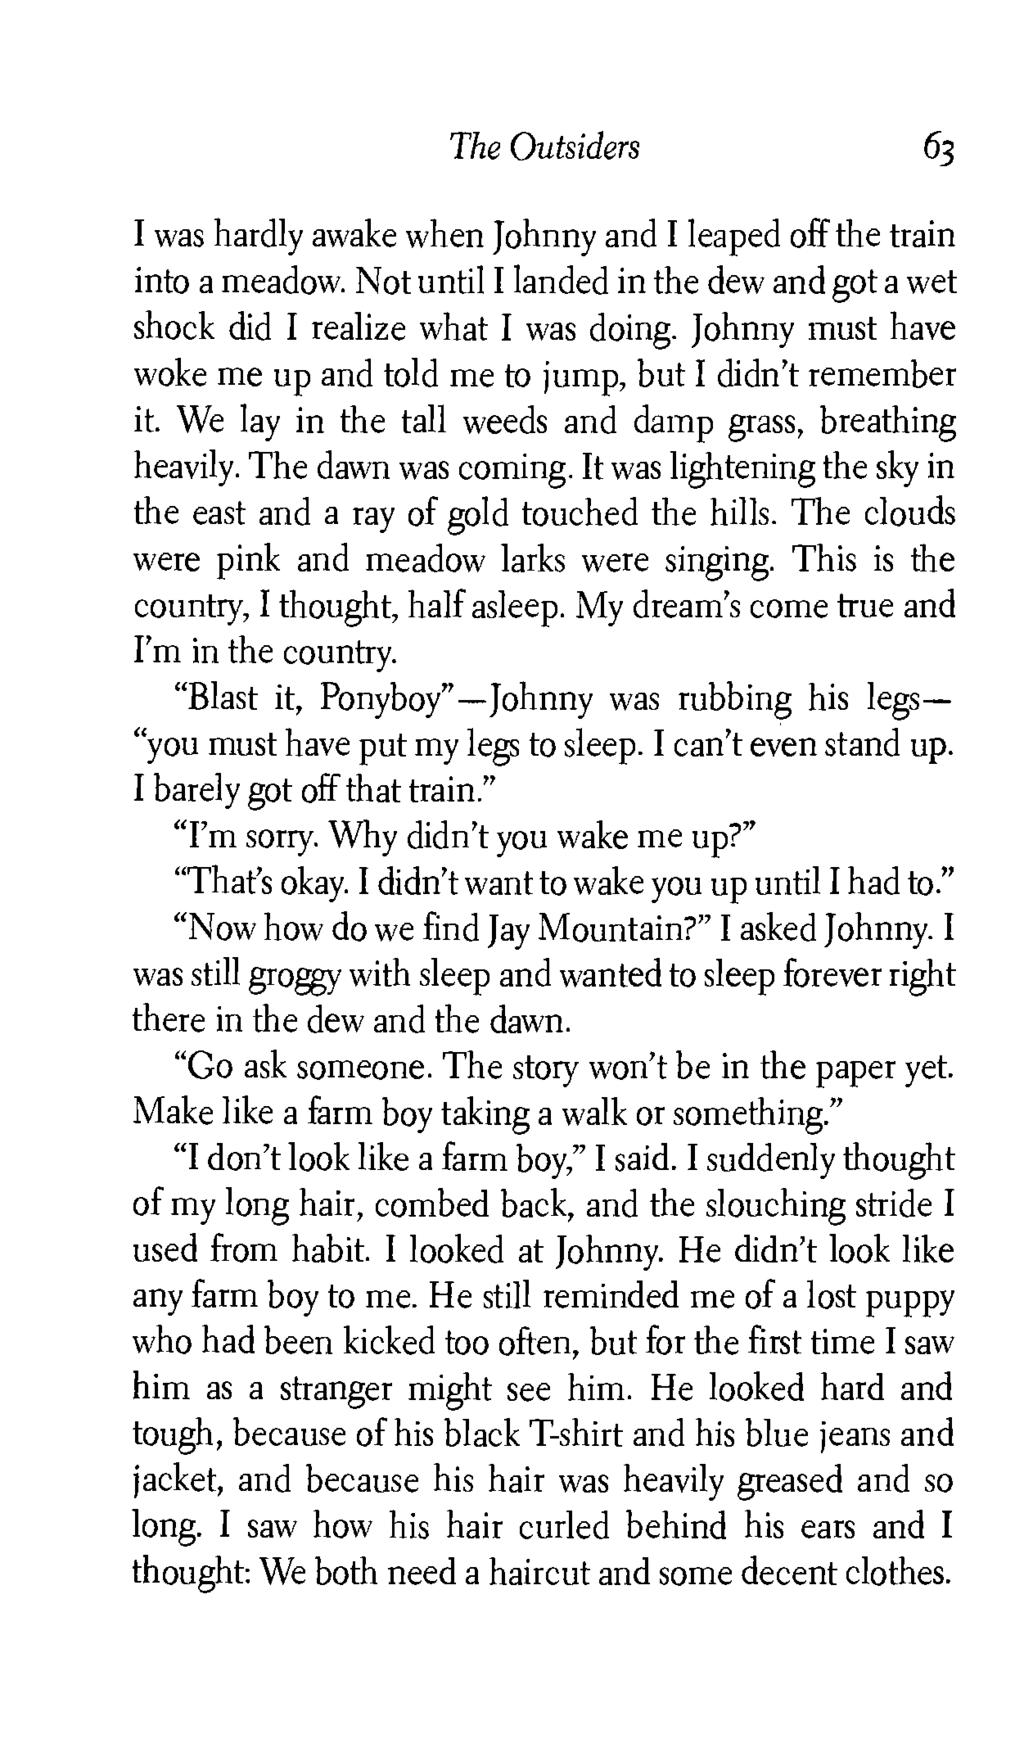 PRINT PAGE 63 I was hardly awake when Johnny and I leaped off the train into a meadow. Not until I landed in the dew and got a wet shock did I realize what I was doing.